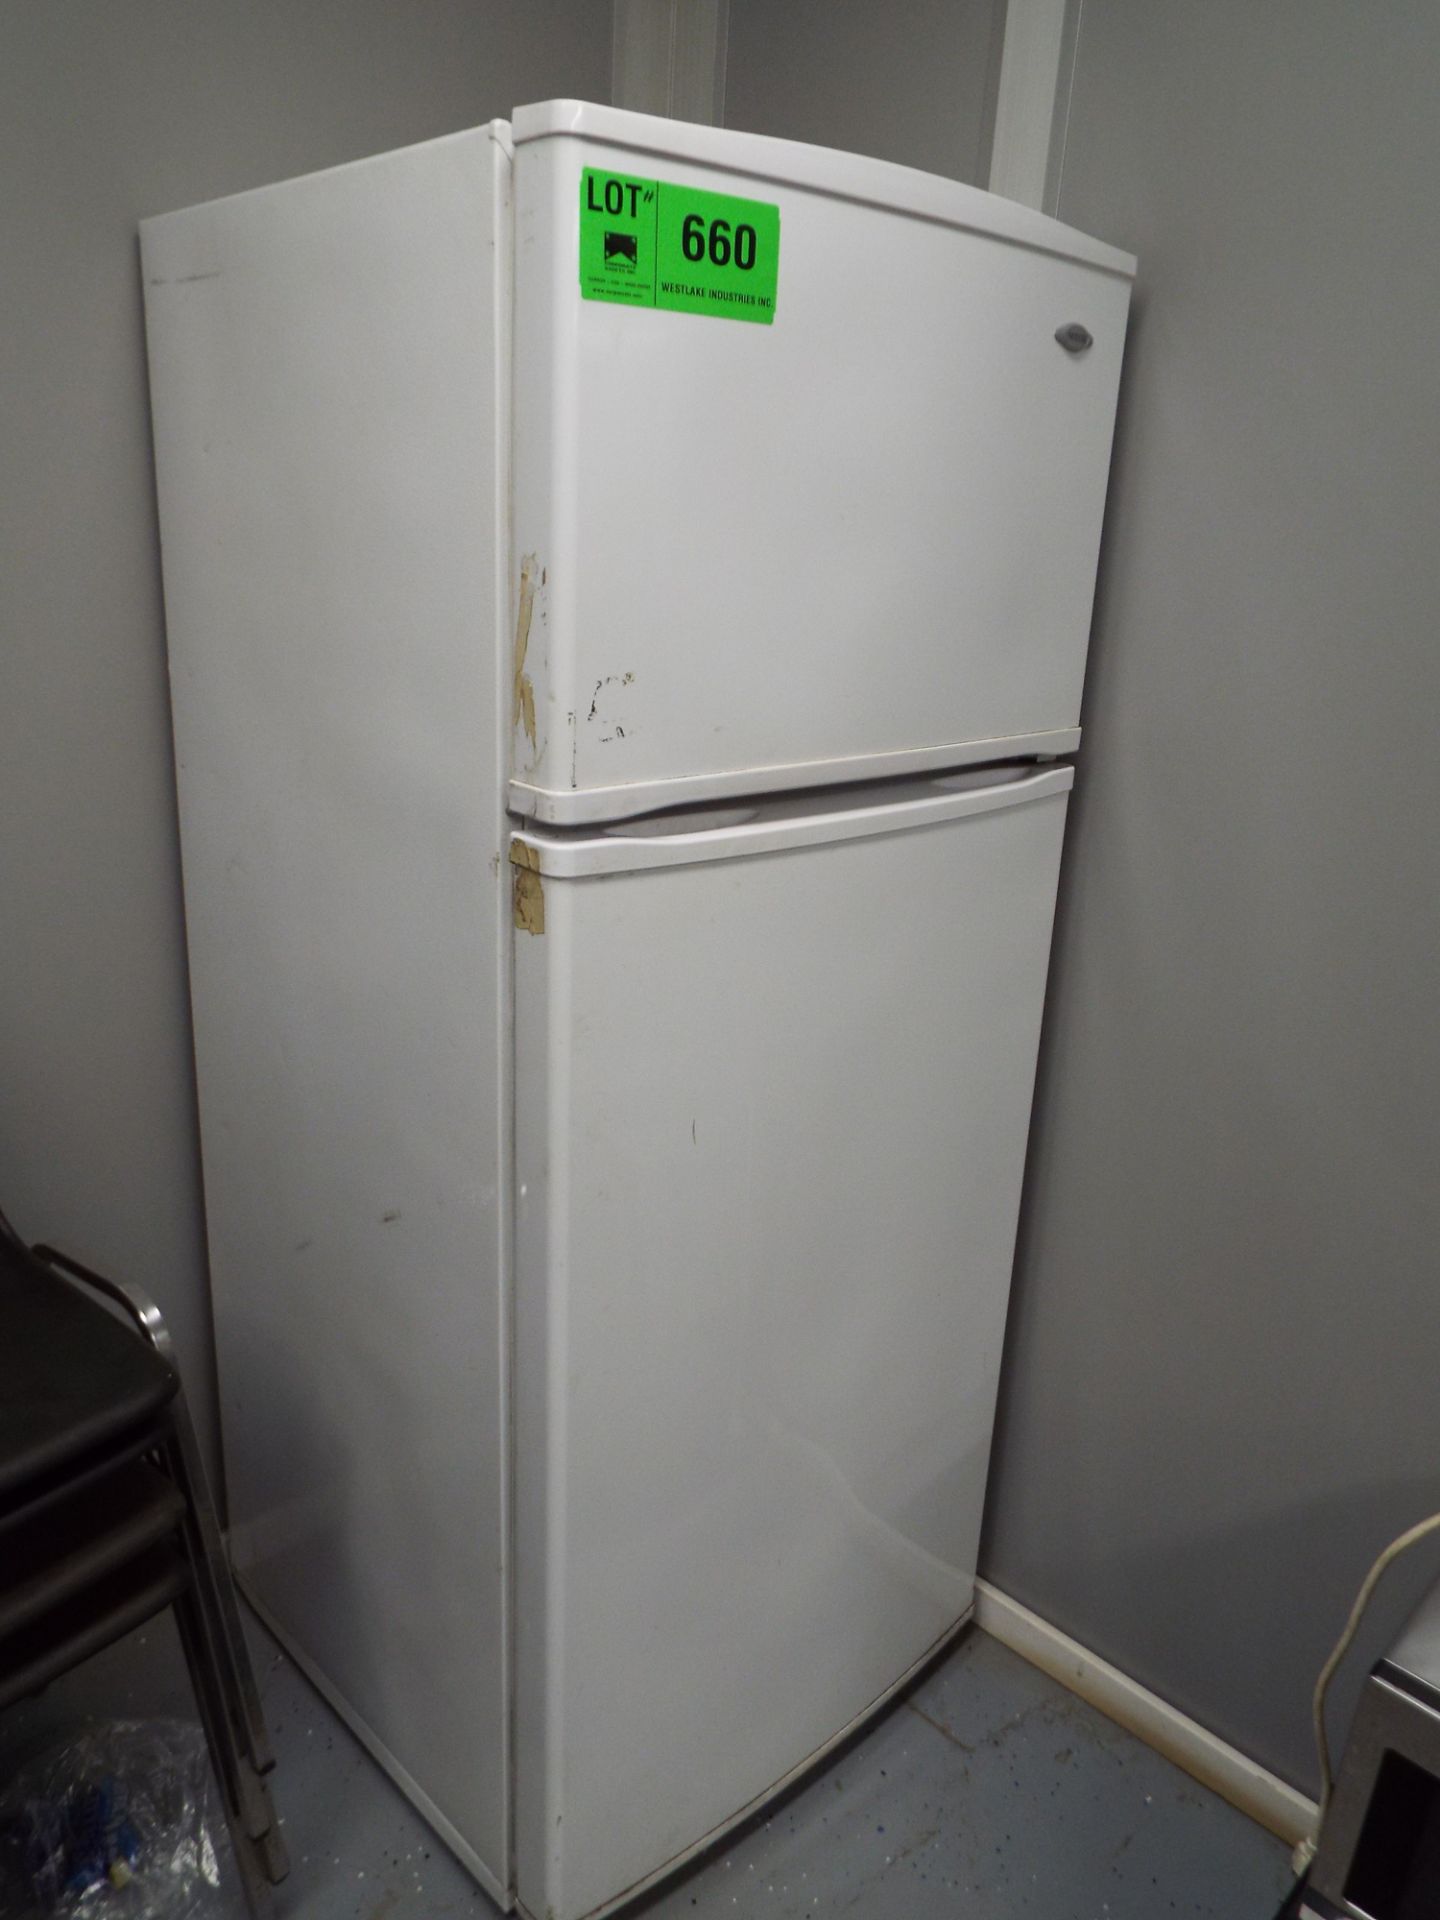 LOT/ LUNCH ROOM APPLIANCES - MAYTAG REFRIGERATOR, (3) MICROWAVES, (2) TOASTERS, (3) ELECTRIC